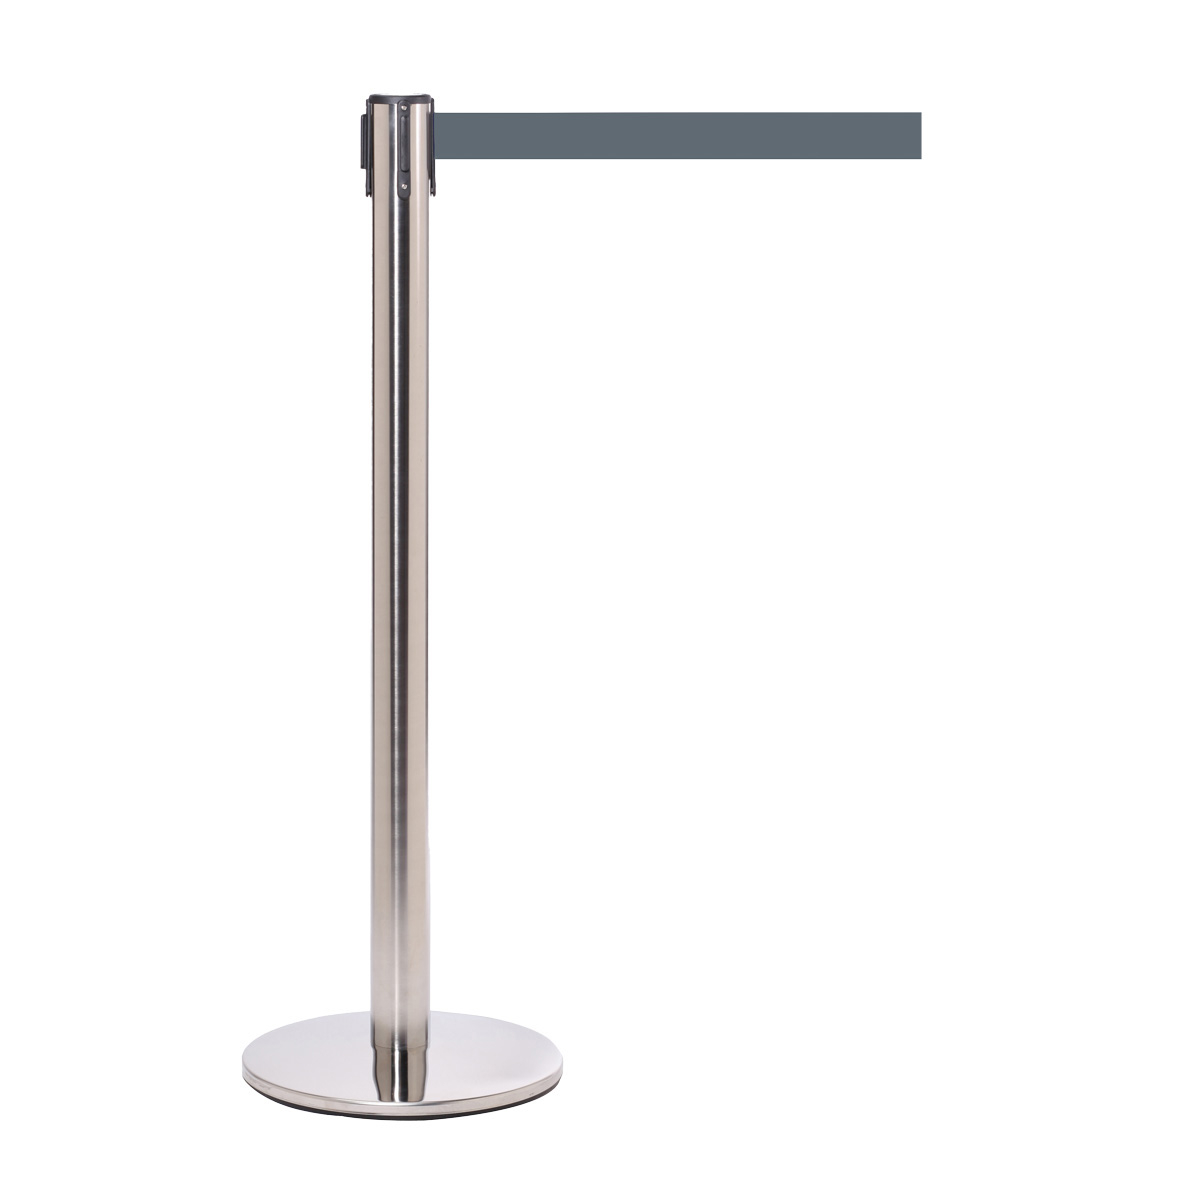 QueuePro Retractable Queue Barriers Are Supplied With Universal Tap End That Feature a Belt Lock to Prevent Accidental Release